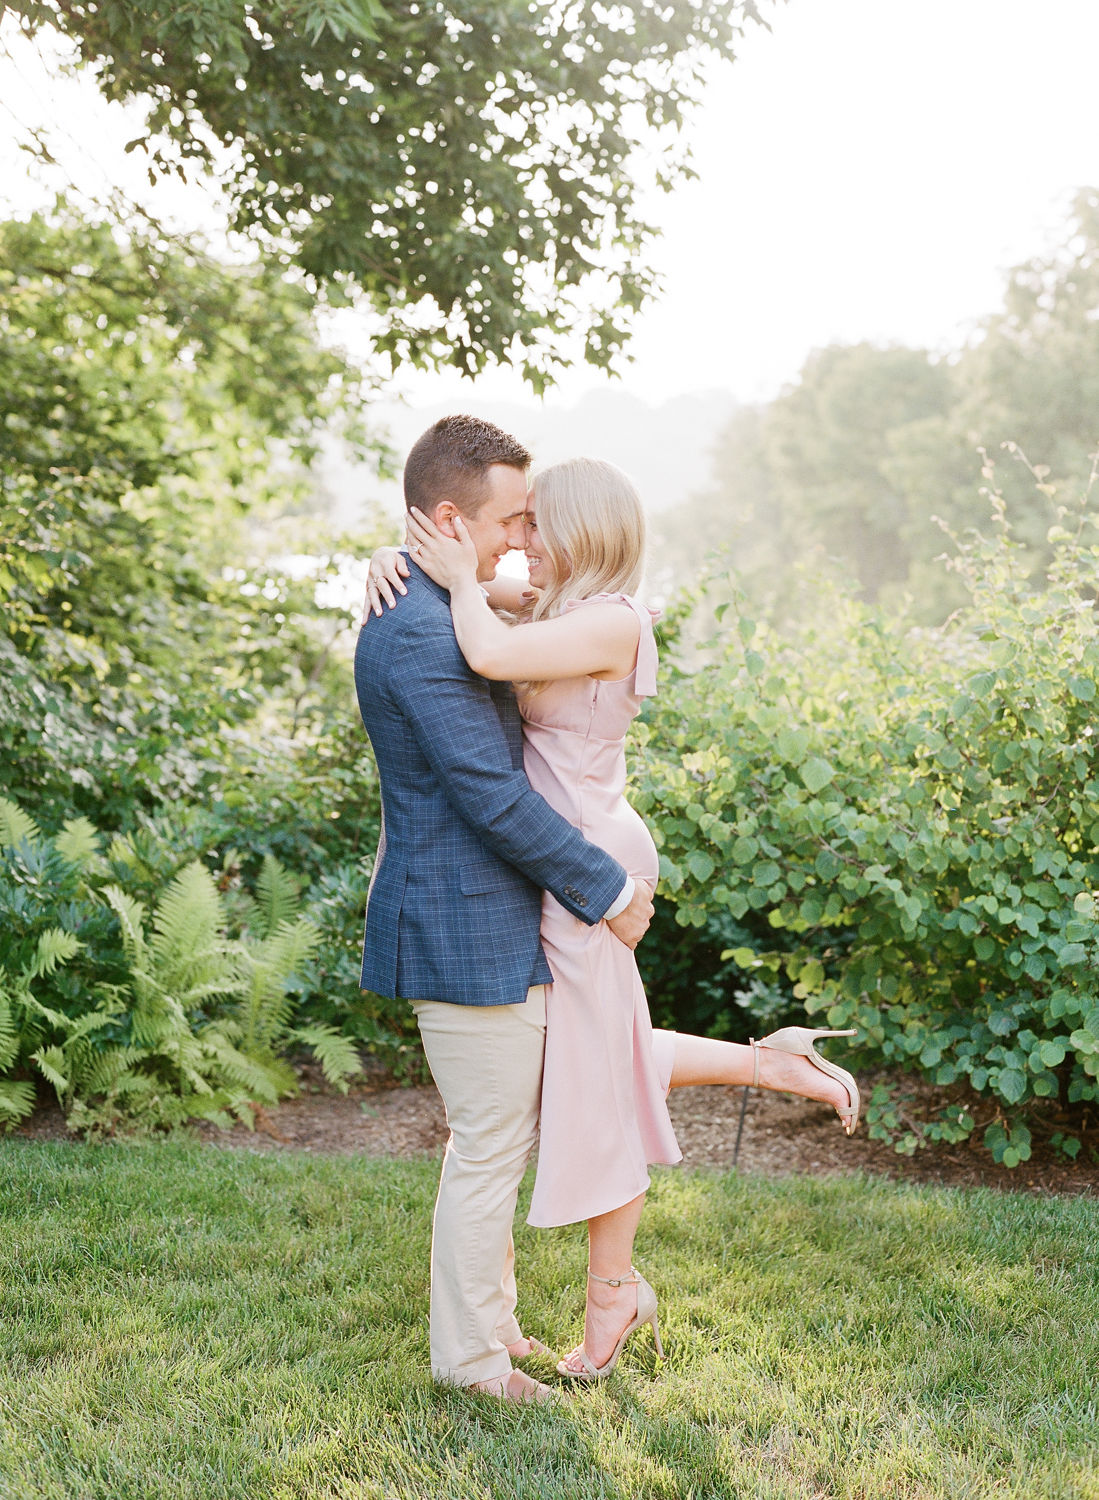 Newfields Anniversary Session by Lauren Peterson Photography